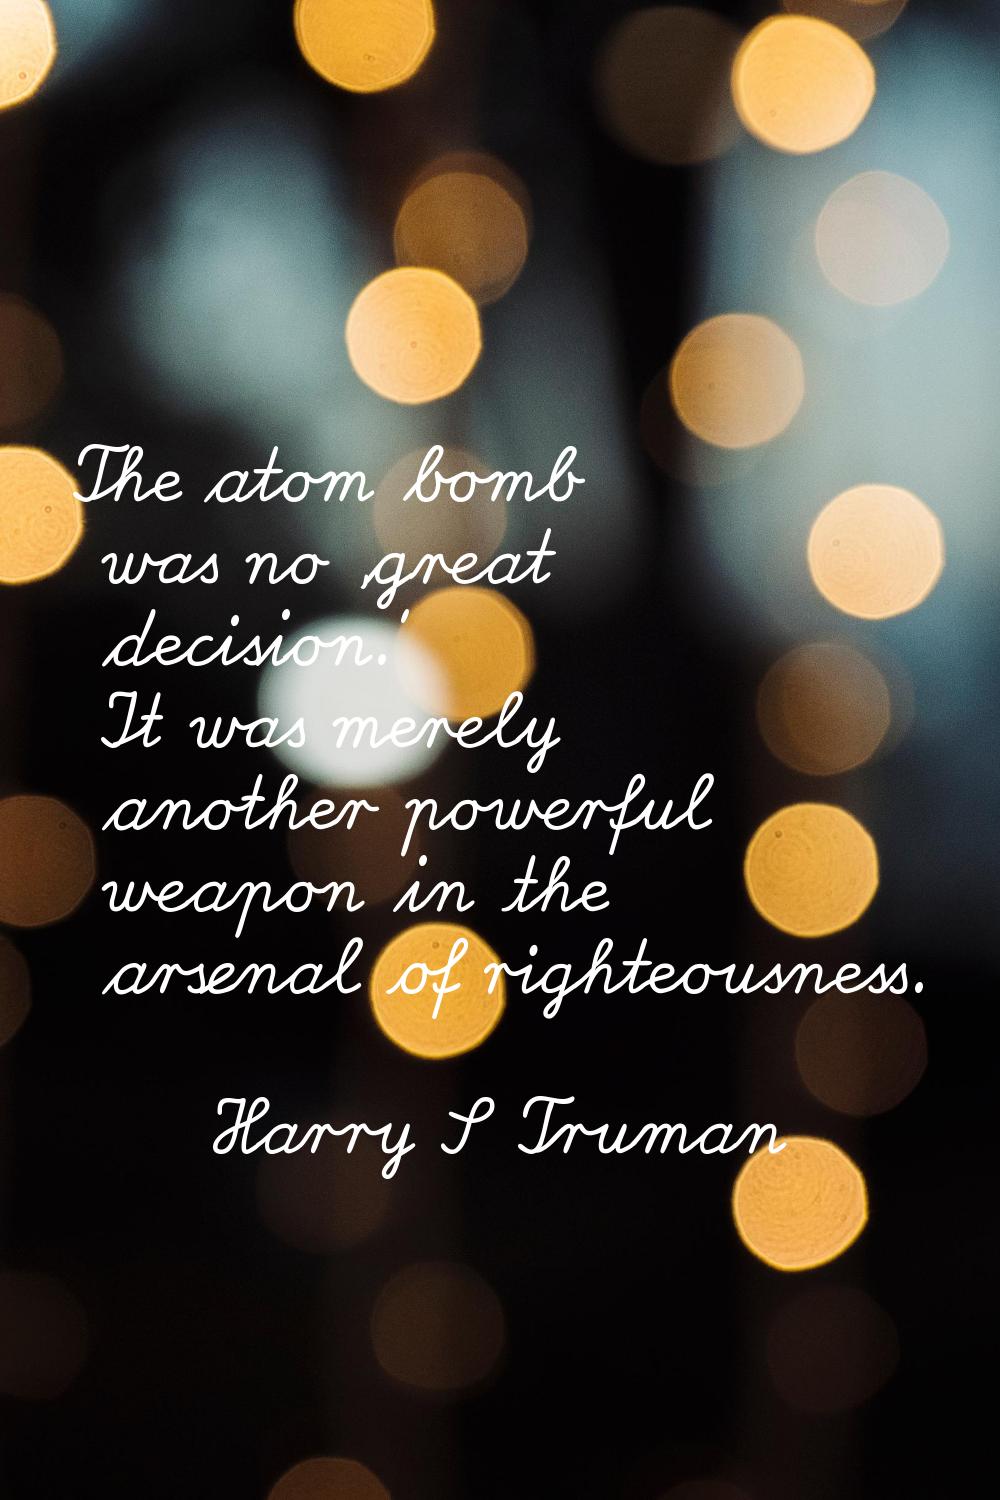 The atom bomb was no 'great decision.' It was merely another powerful weapon in the arsenal of righ